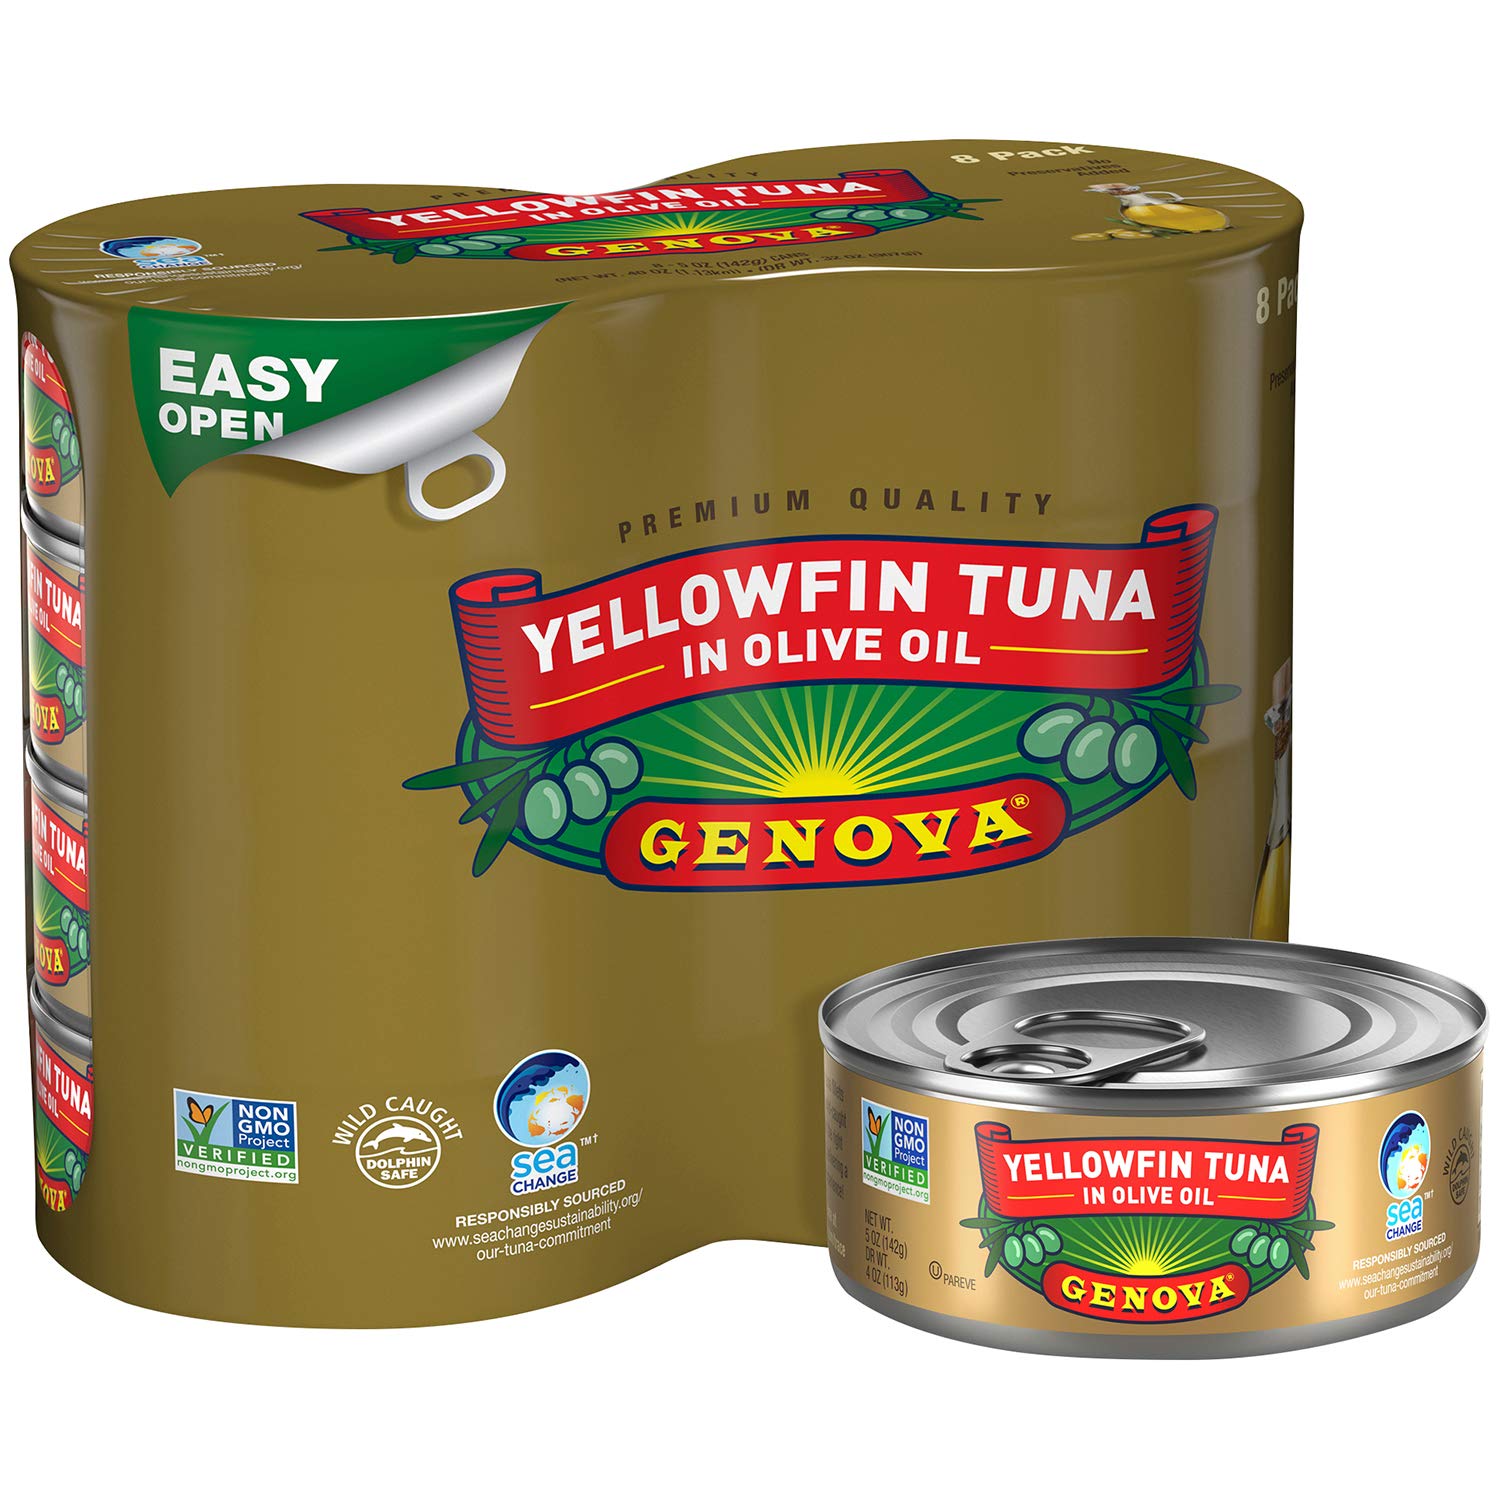 Genova Yellowfin Tuna in Olive Oil, 5 ounce can (Pack of 8) $11.04 Amazon S&S